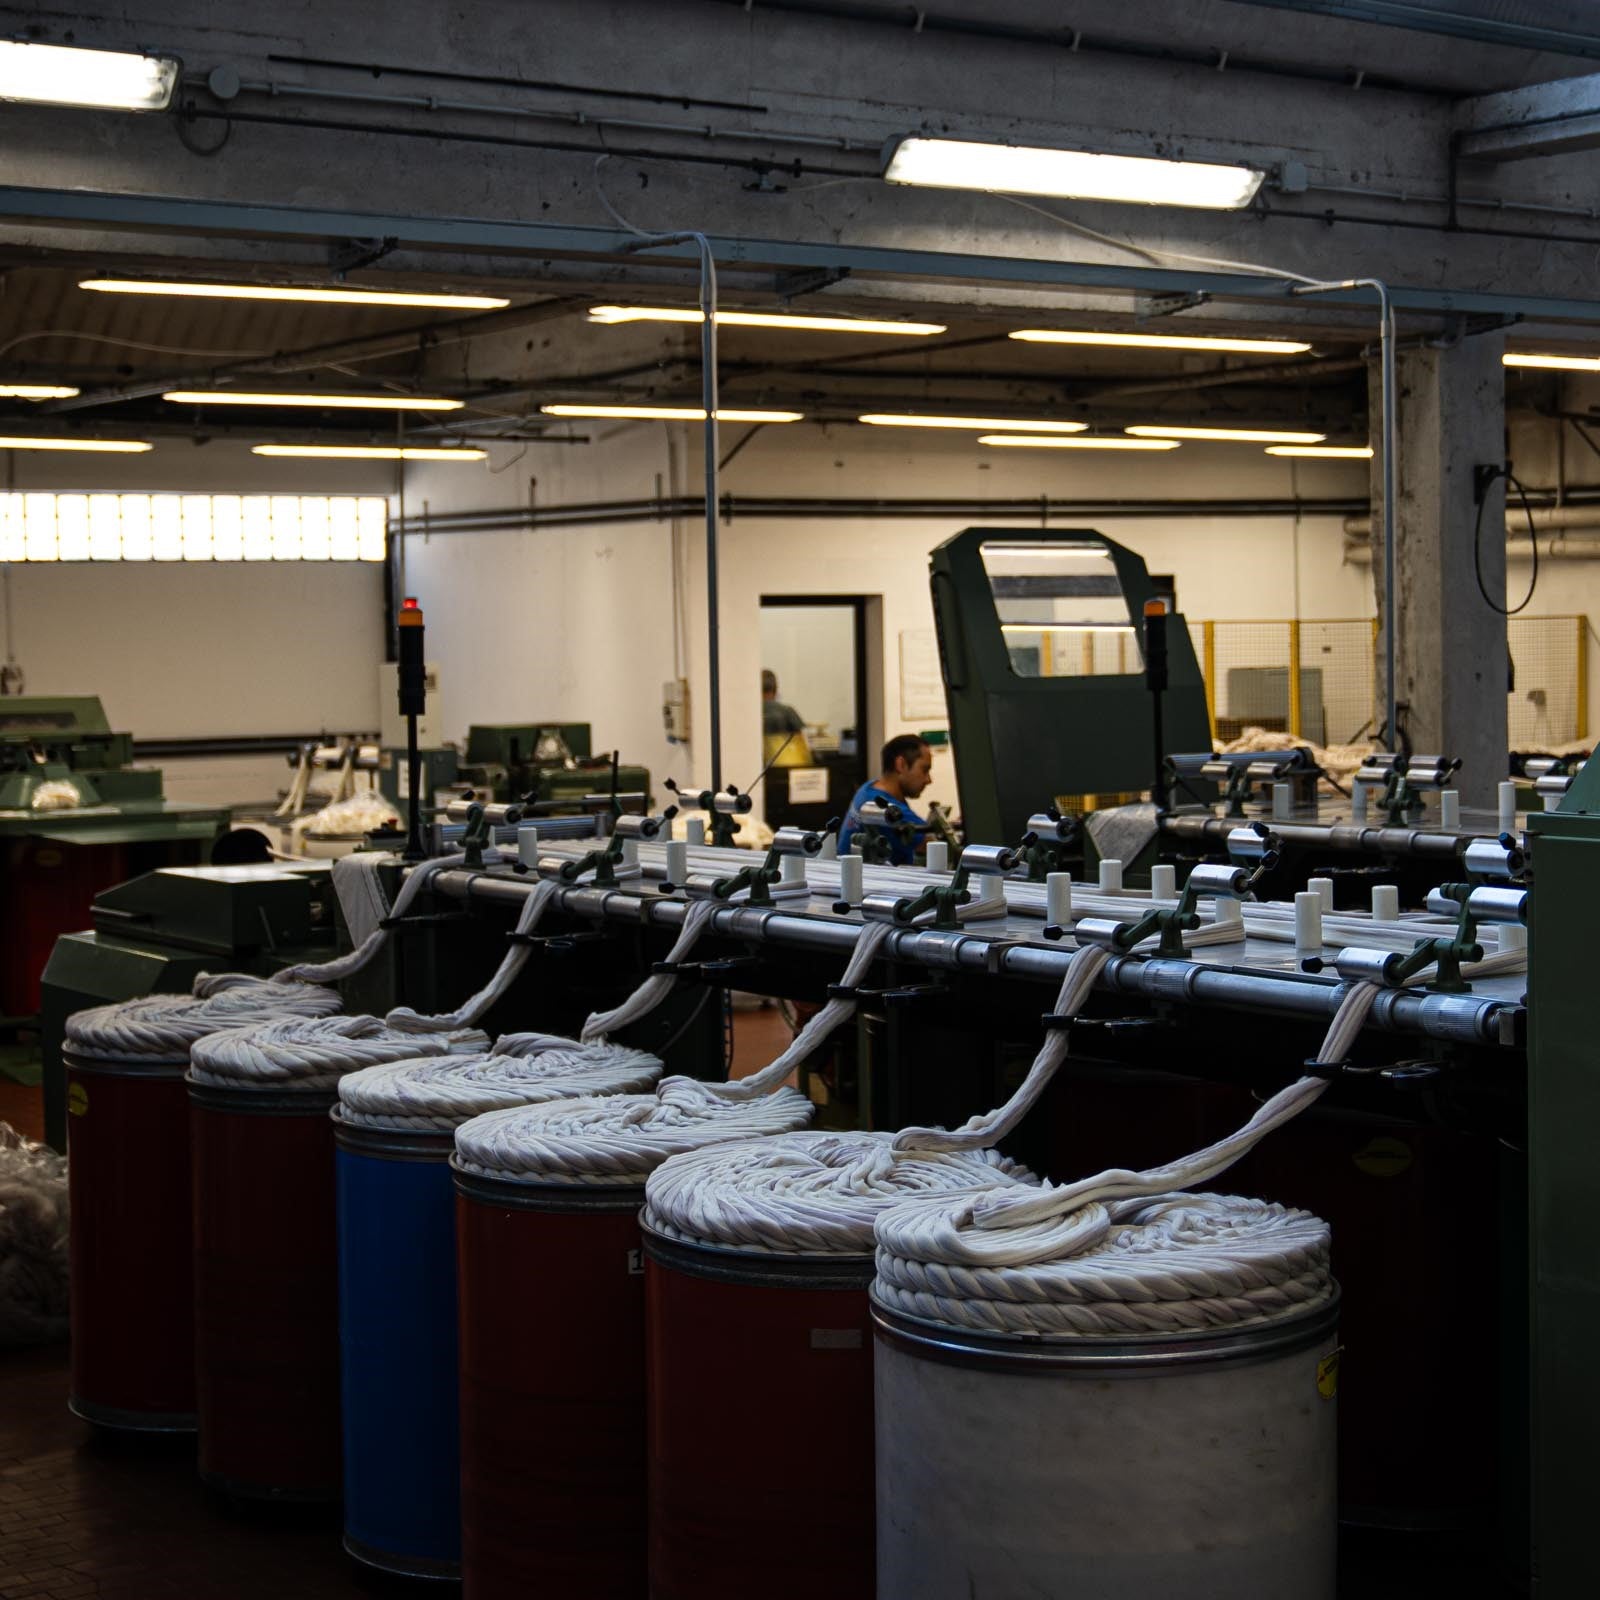 A wide shot of Merino wool tops being fed into the wool blending and combing machine at the ARA spinning facility.